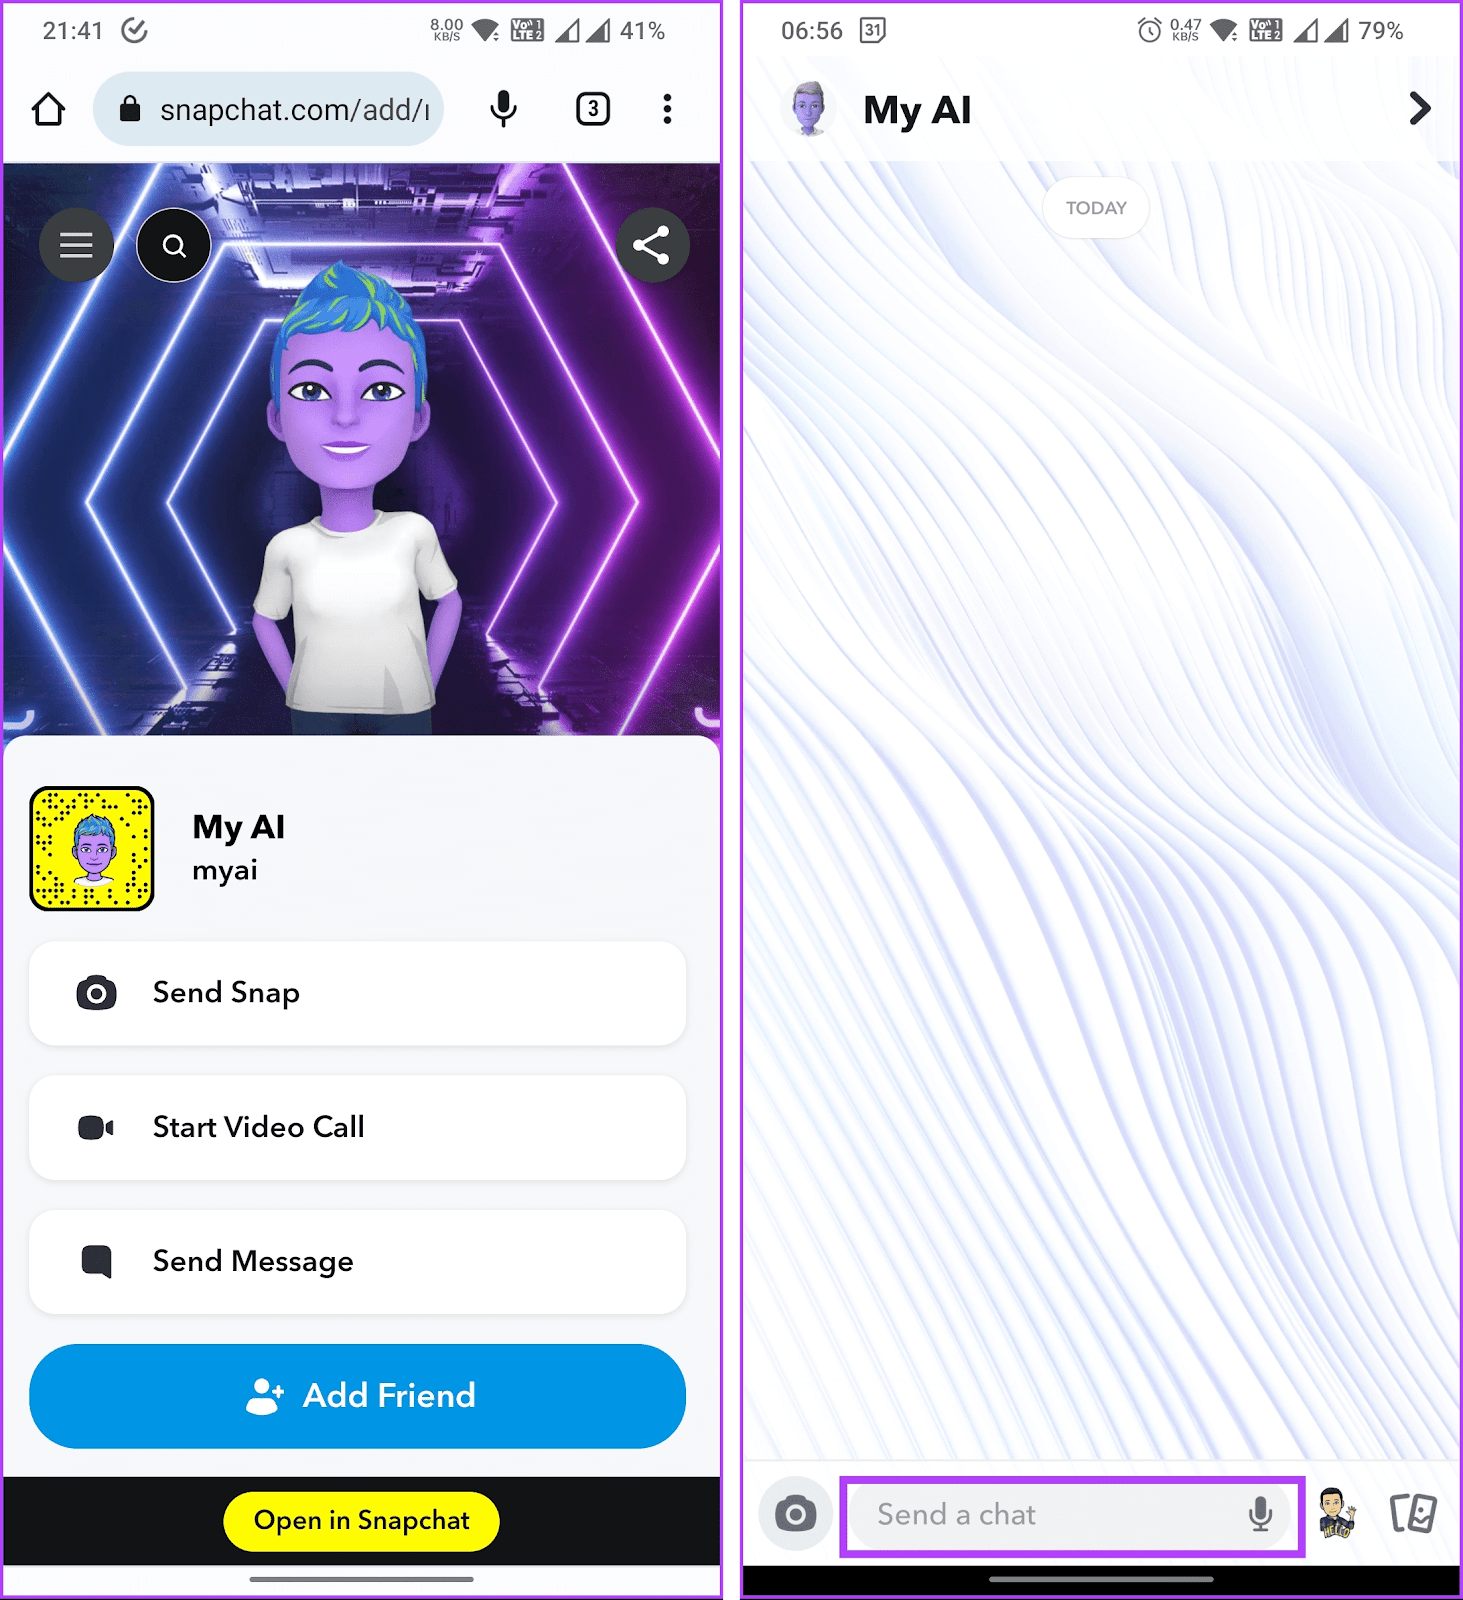 Introducing Snapchat's My AI Bot and its Capabilities